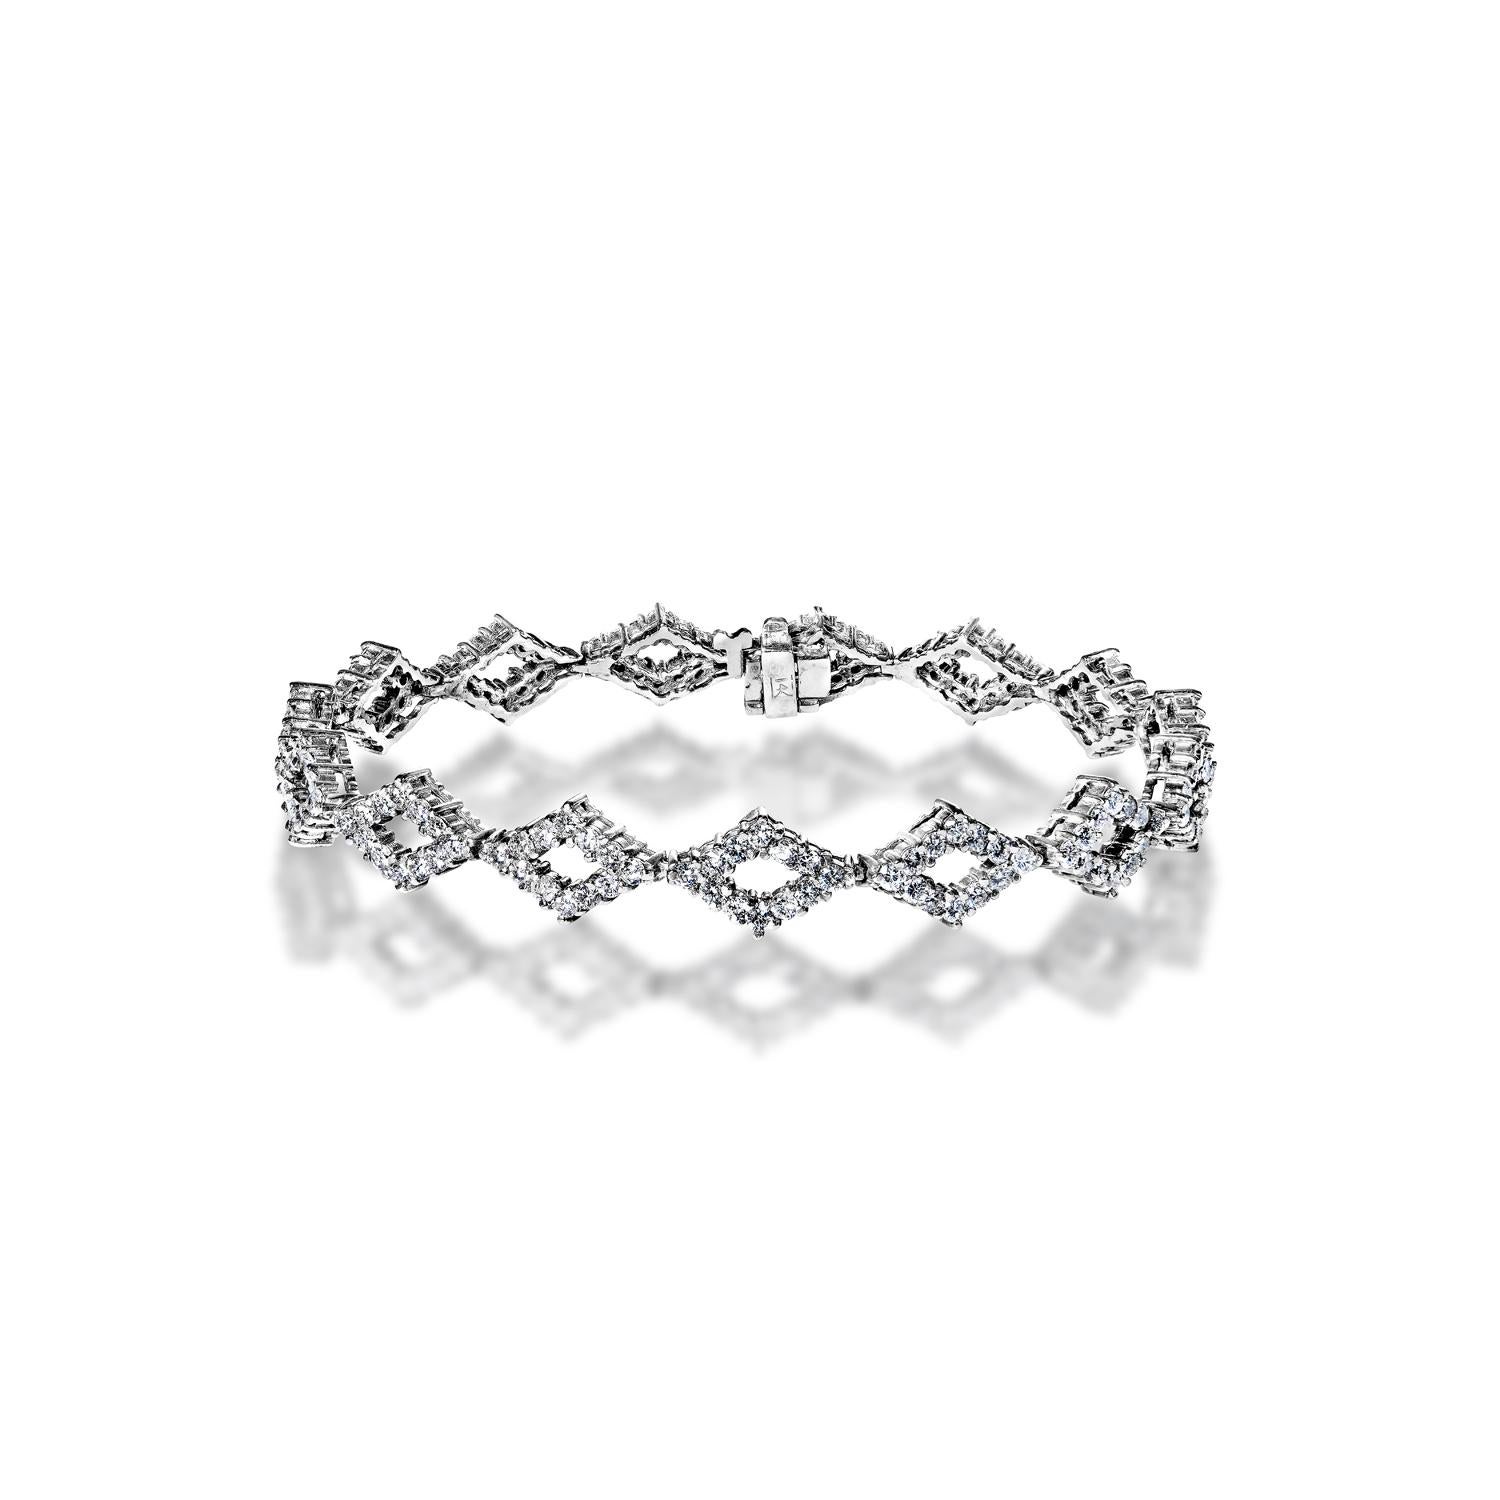 Style:
Diamonds
Diamond Size: 3.80 Carats
Diamond Shape: Round Brilliant Cut

Setting: Shared Prong
Metal: 14 Karat White Gold
Clasp: Box catch with hidden safety

Total Carat Weight: 3.80 Carats